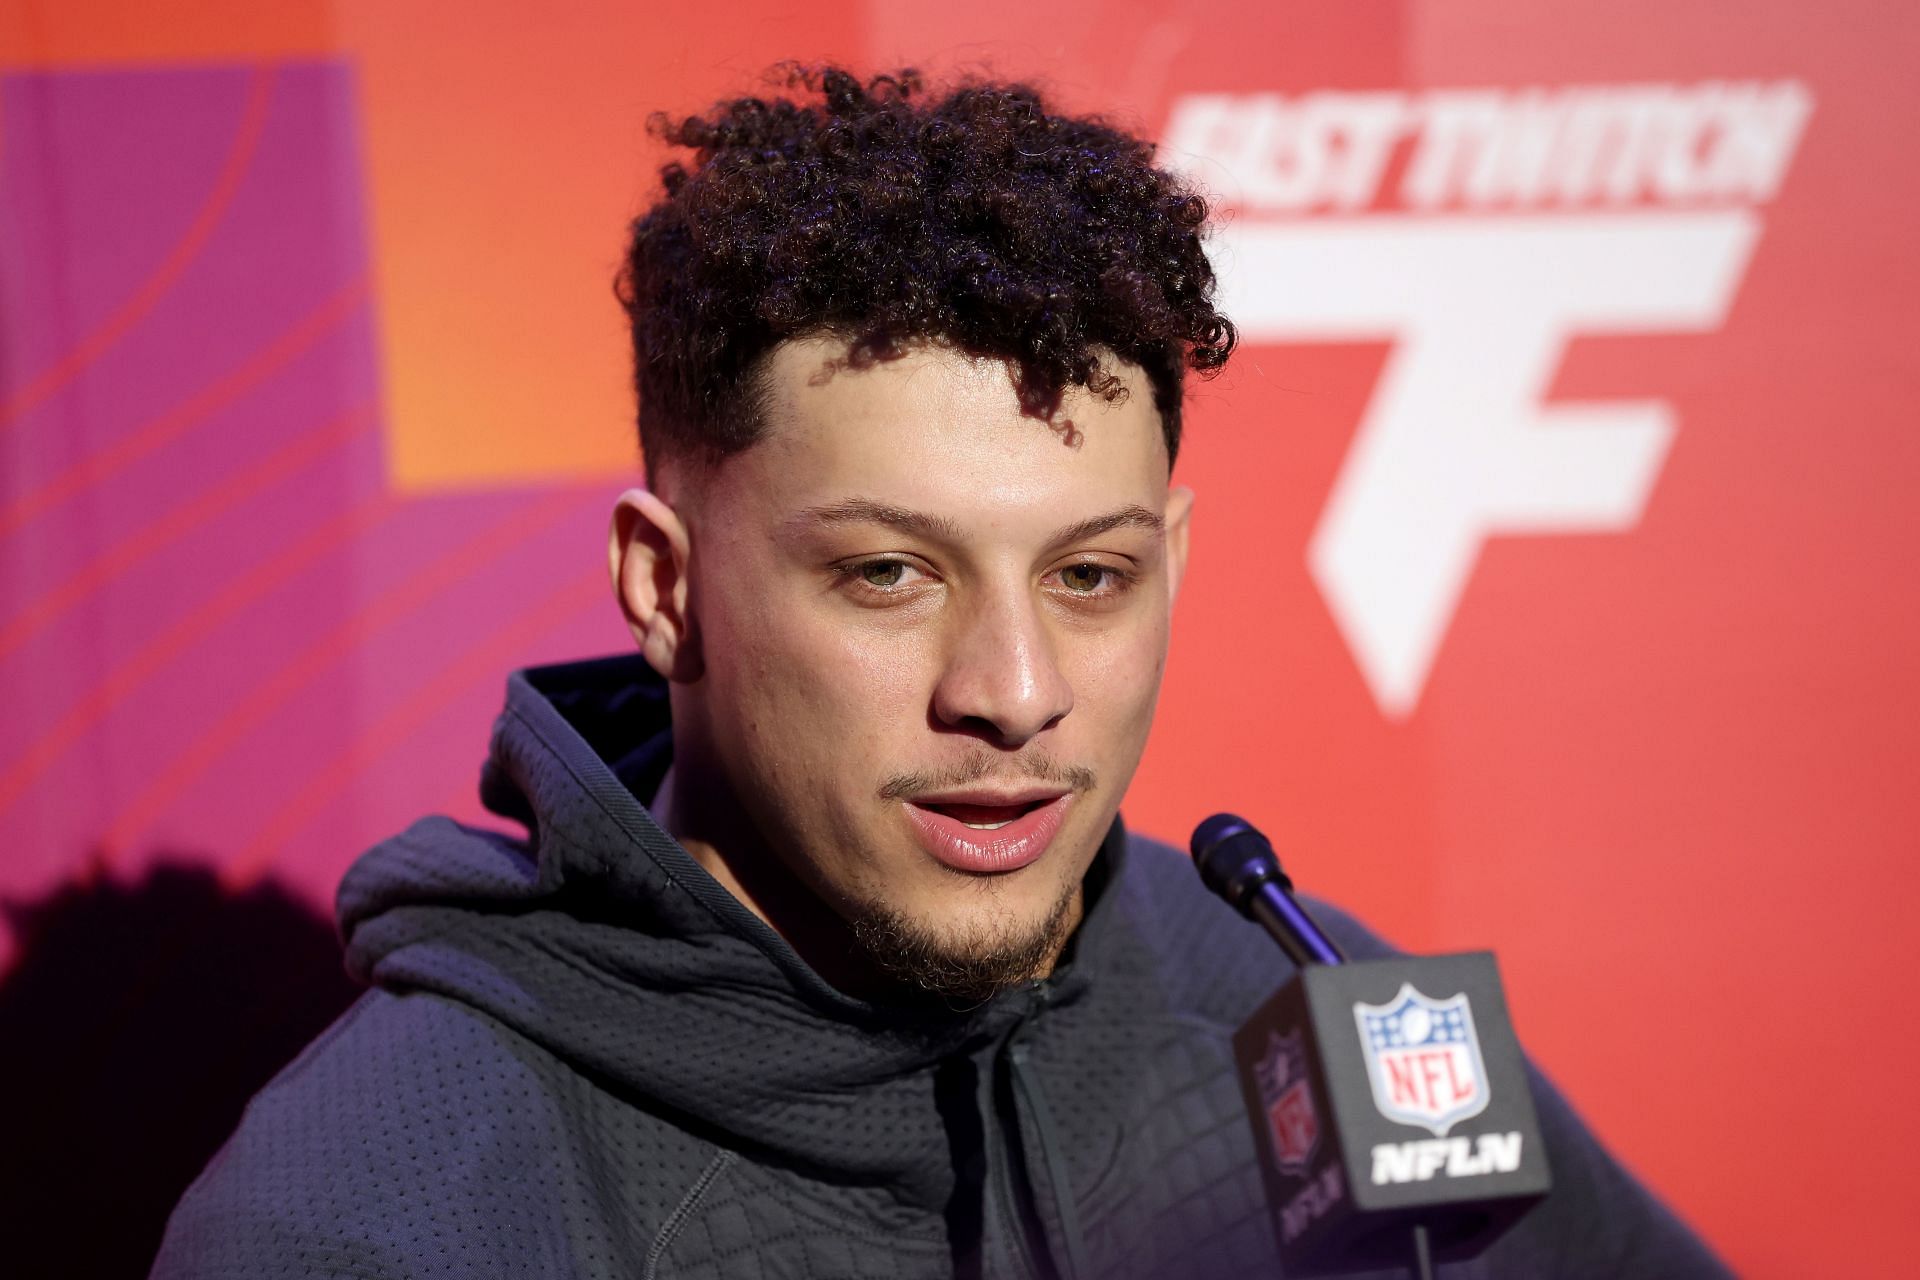 Patrick Mahomes: Super Bowl LVII Opening Night presented by Fast Twitch